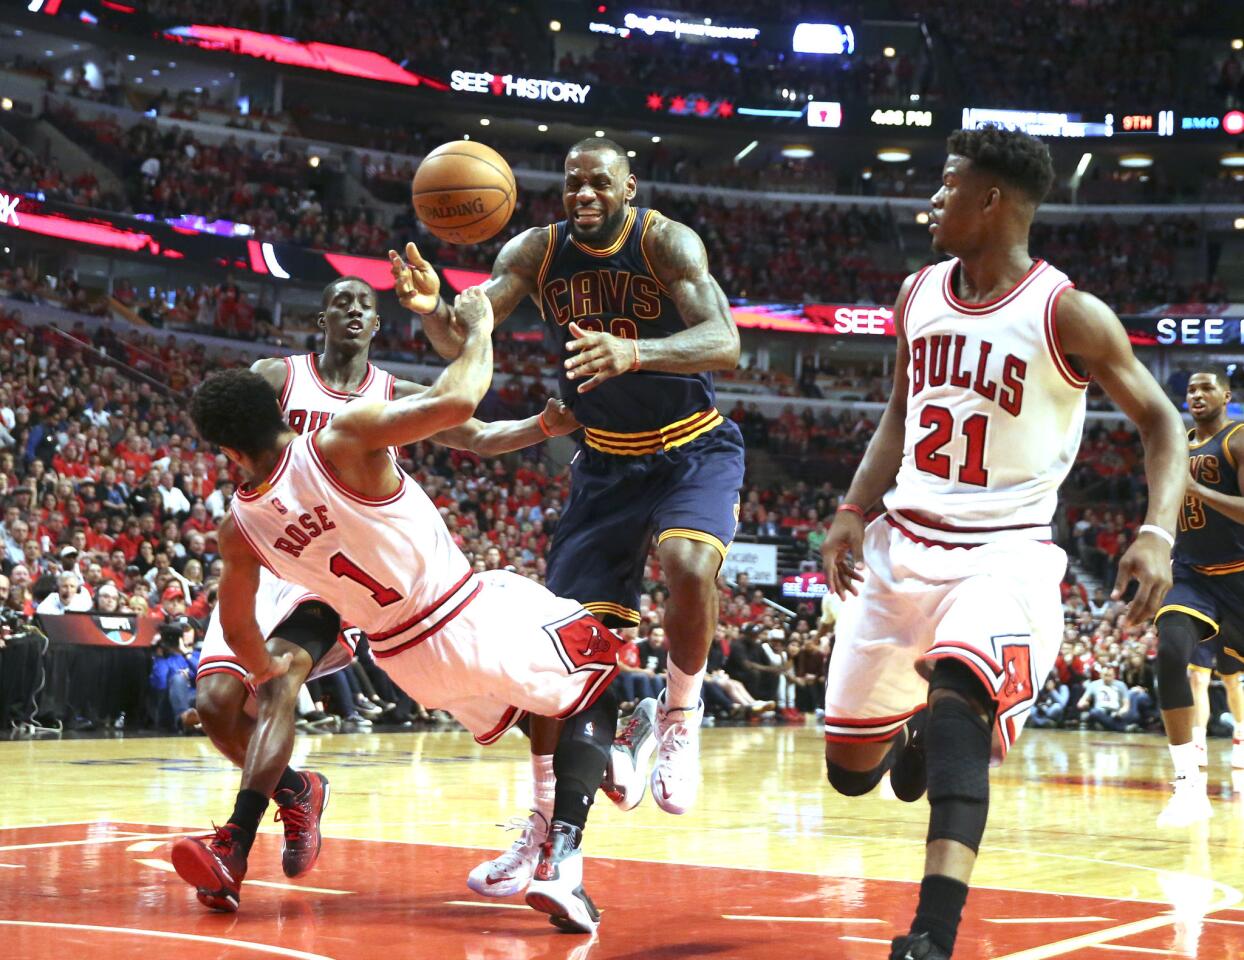 Derrick Rose stops LeBron James on his way to the basket during the second half.